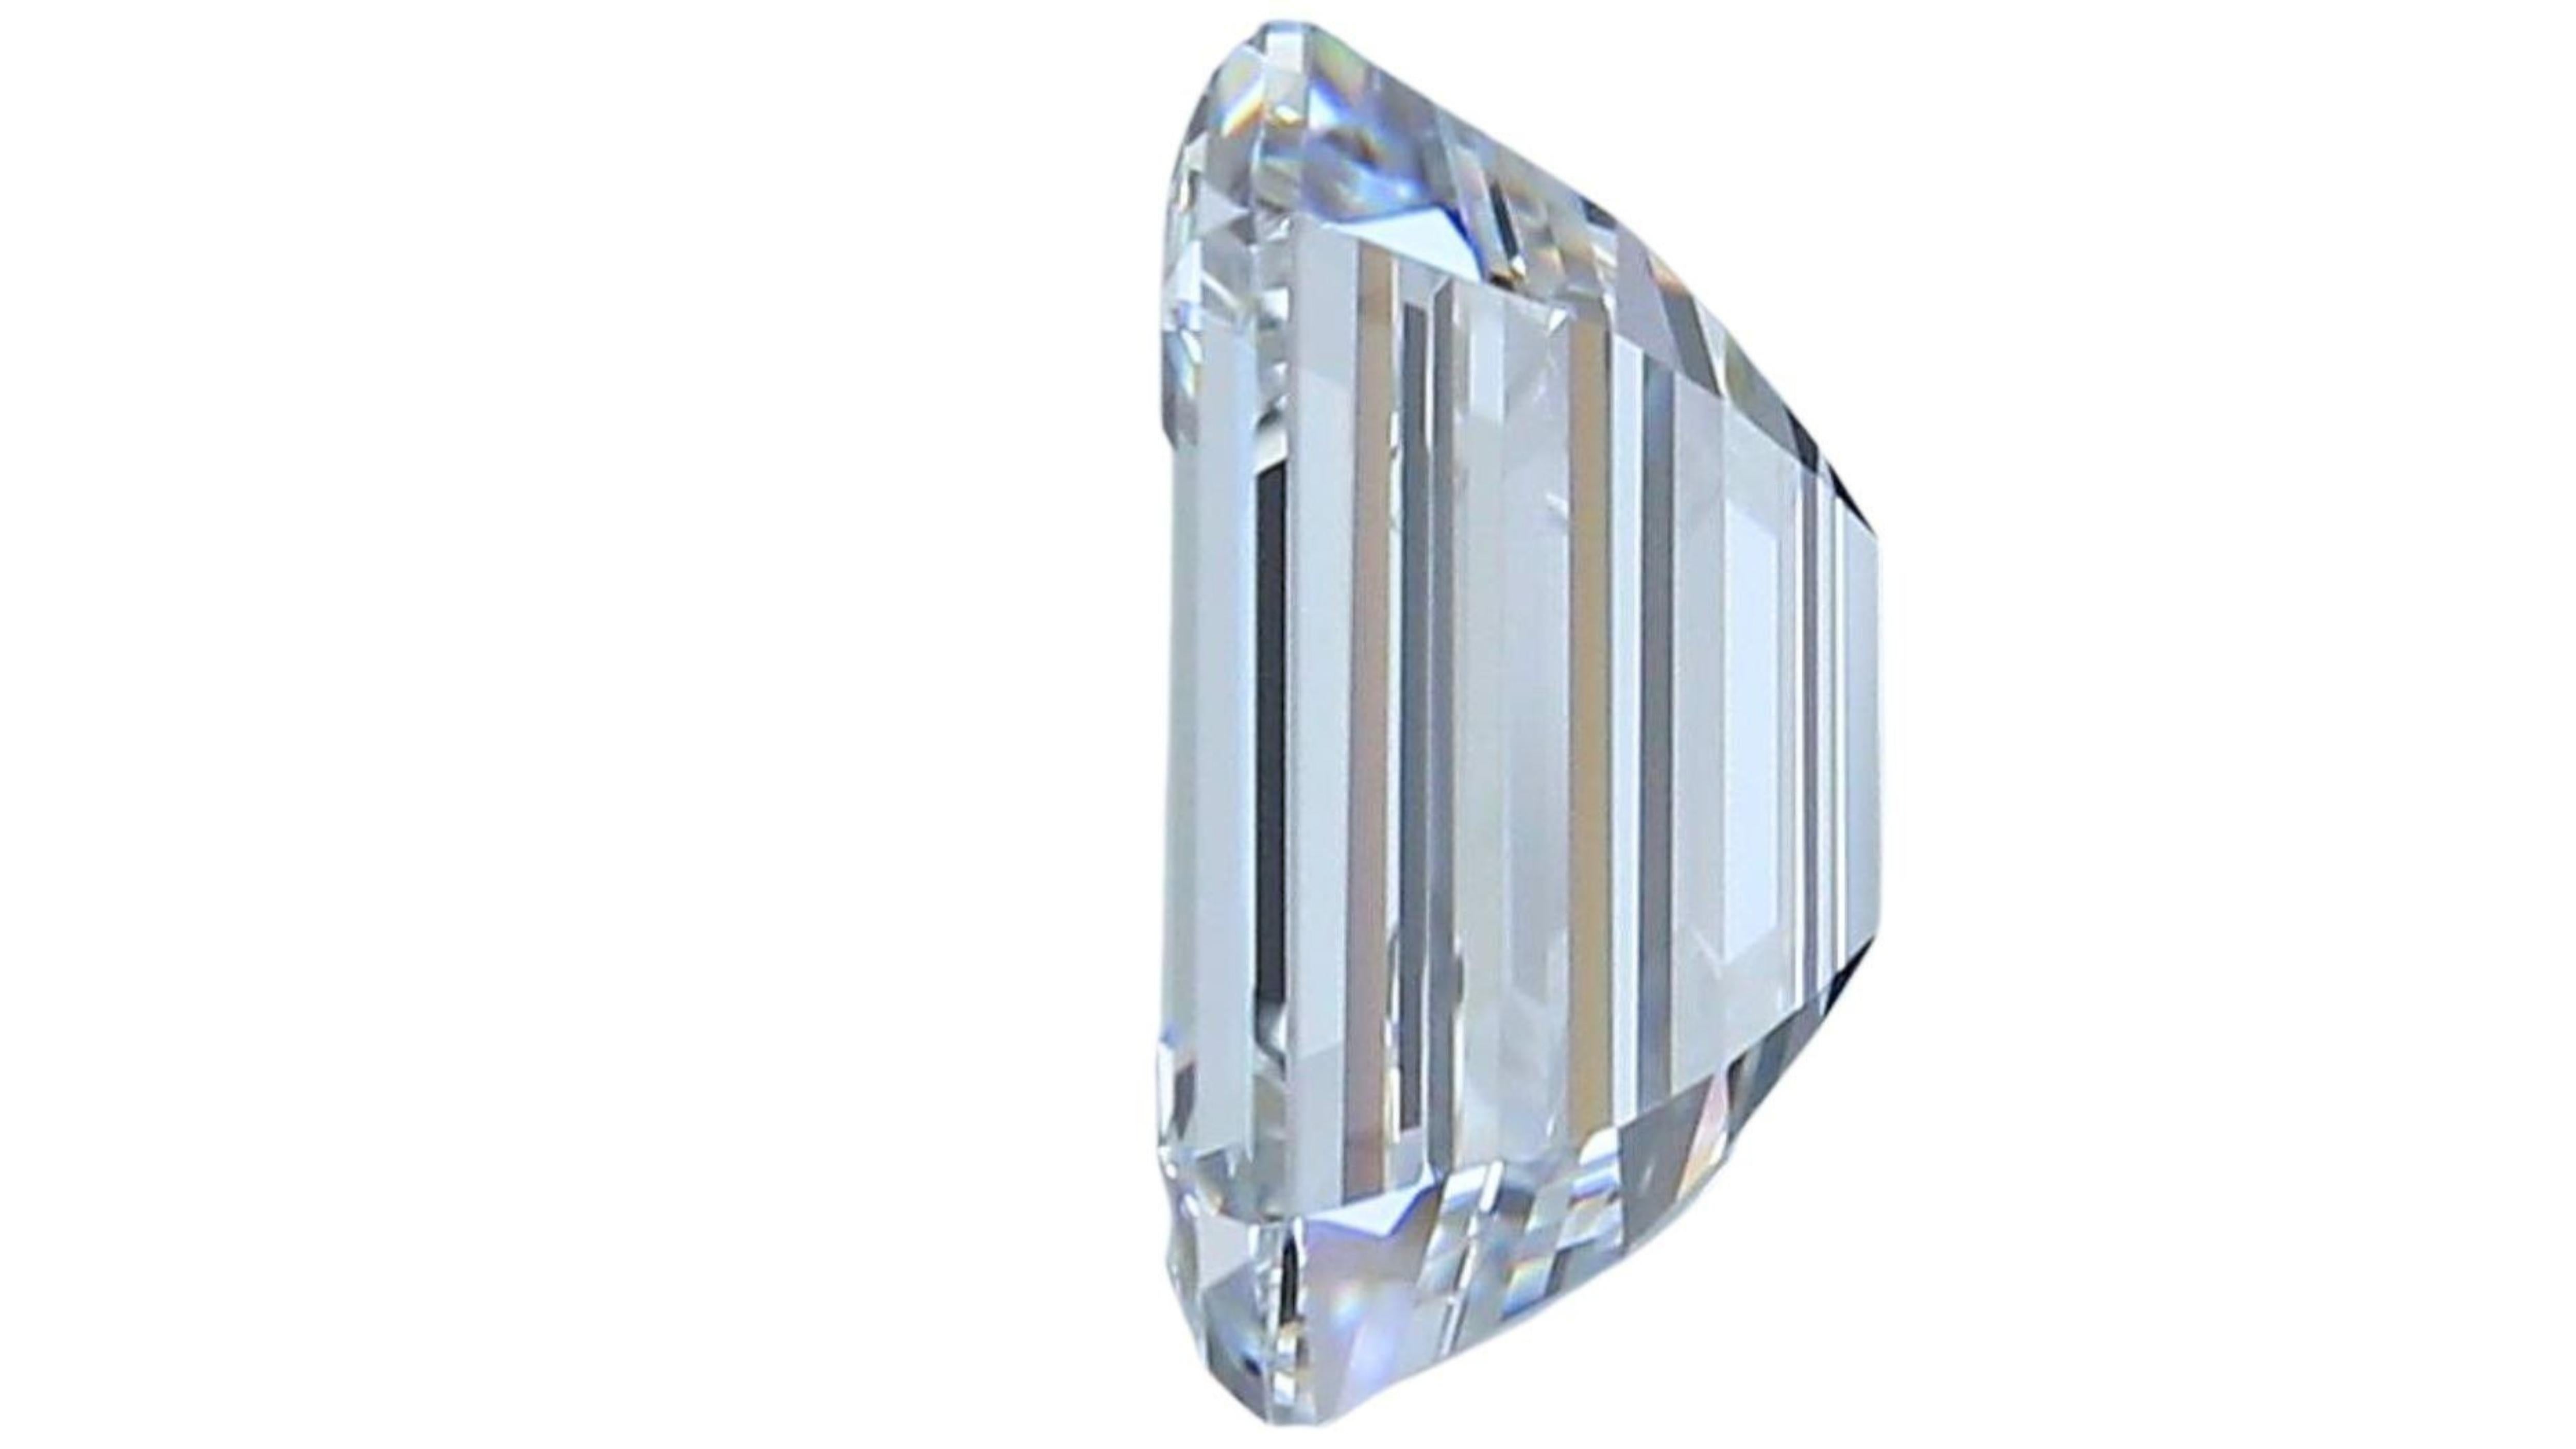 1 pc. Shimmering 4.01 Carat Emerald Cut Natural Diamond For Sale 2